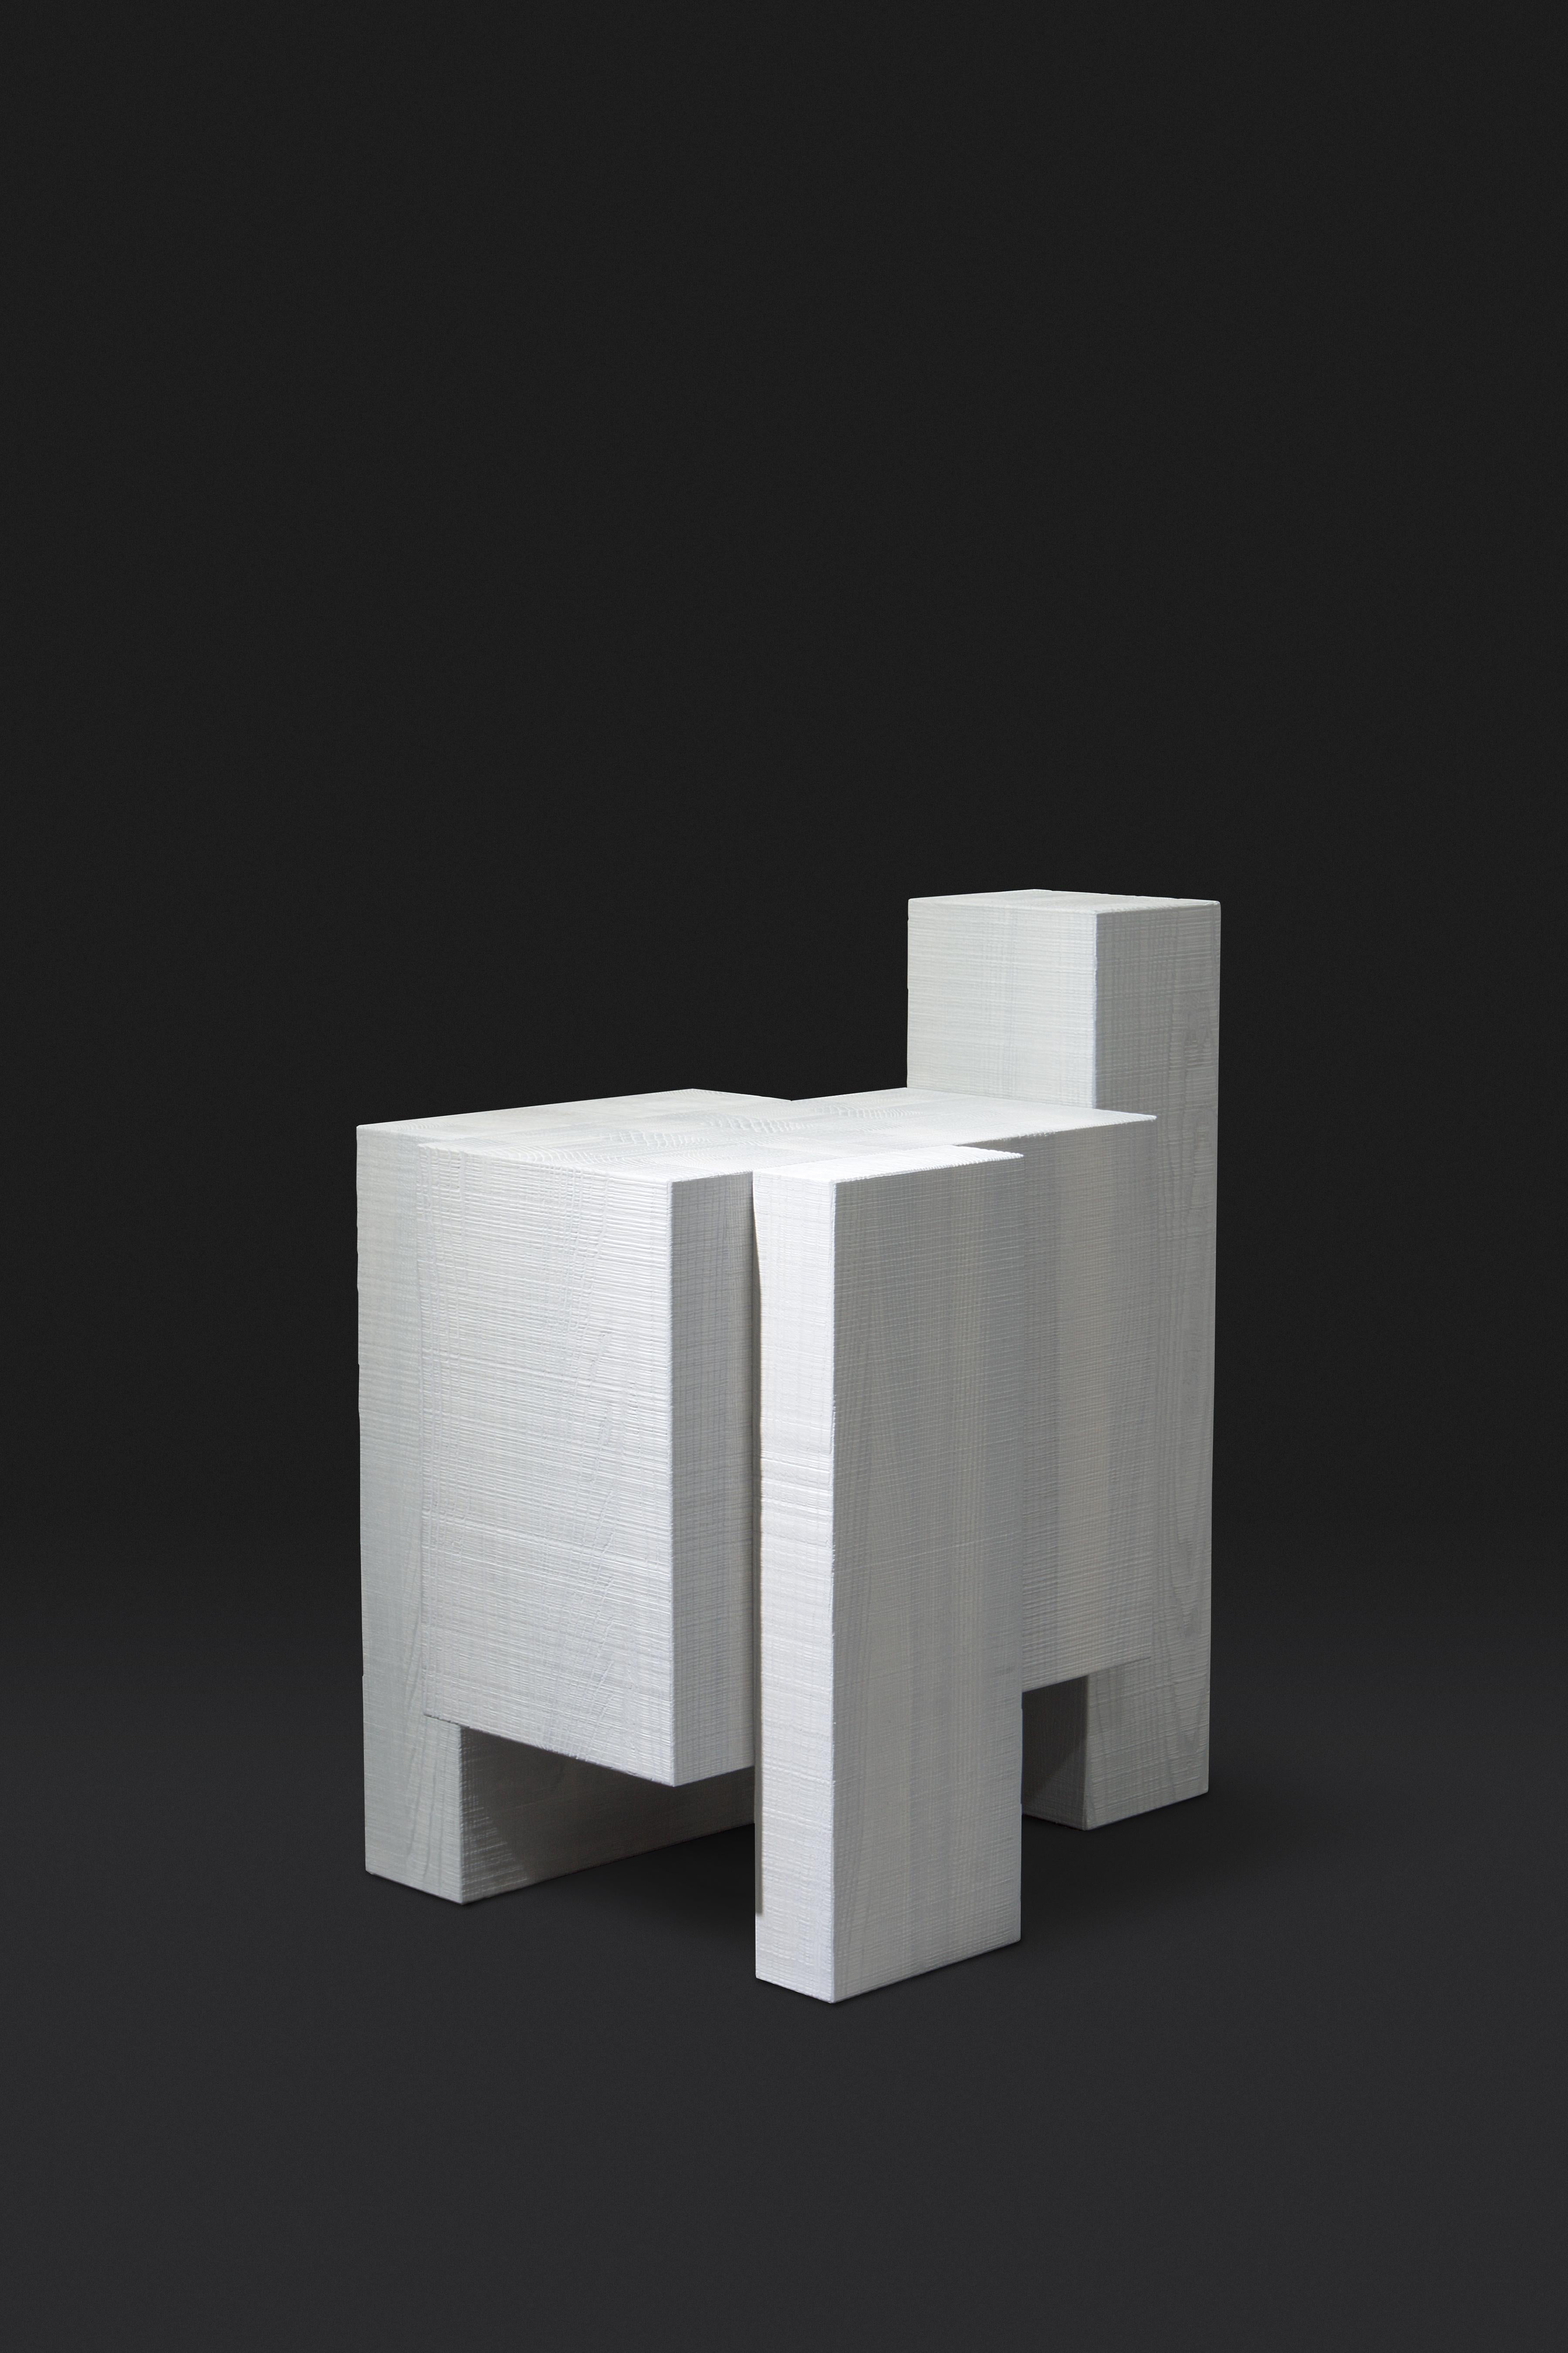 White layered ash wood stool I by Hyungshin Hwang.
Dimensions: D 36 x W 54 x H 54 cm.
Materials: oxidized ash.

Layered Series is the main theme and concept of work of Hwang, who continues his experiment which is based on architectural